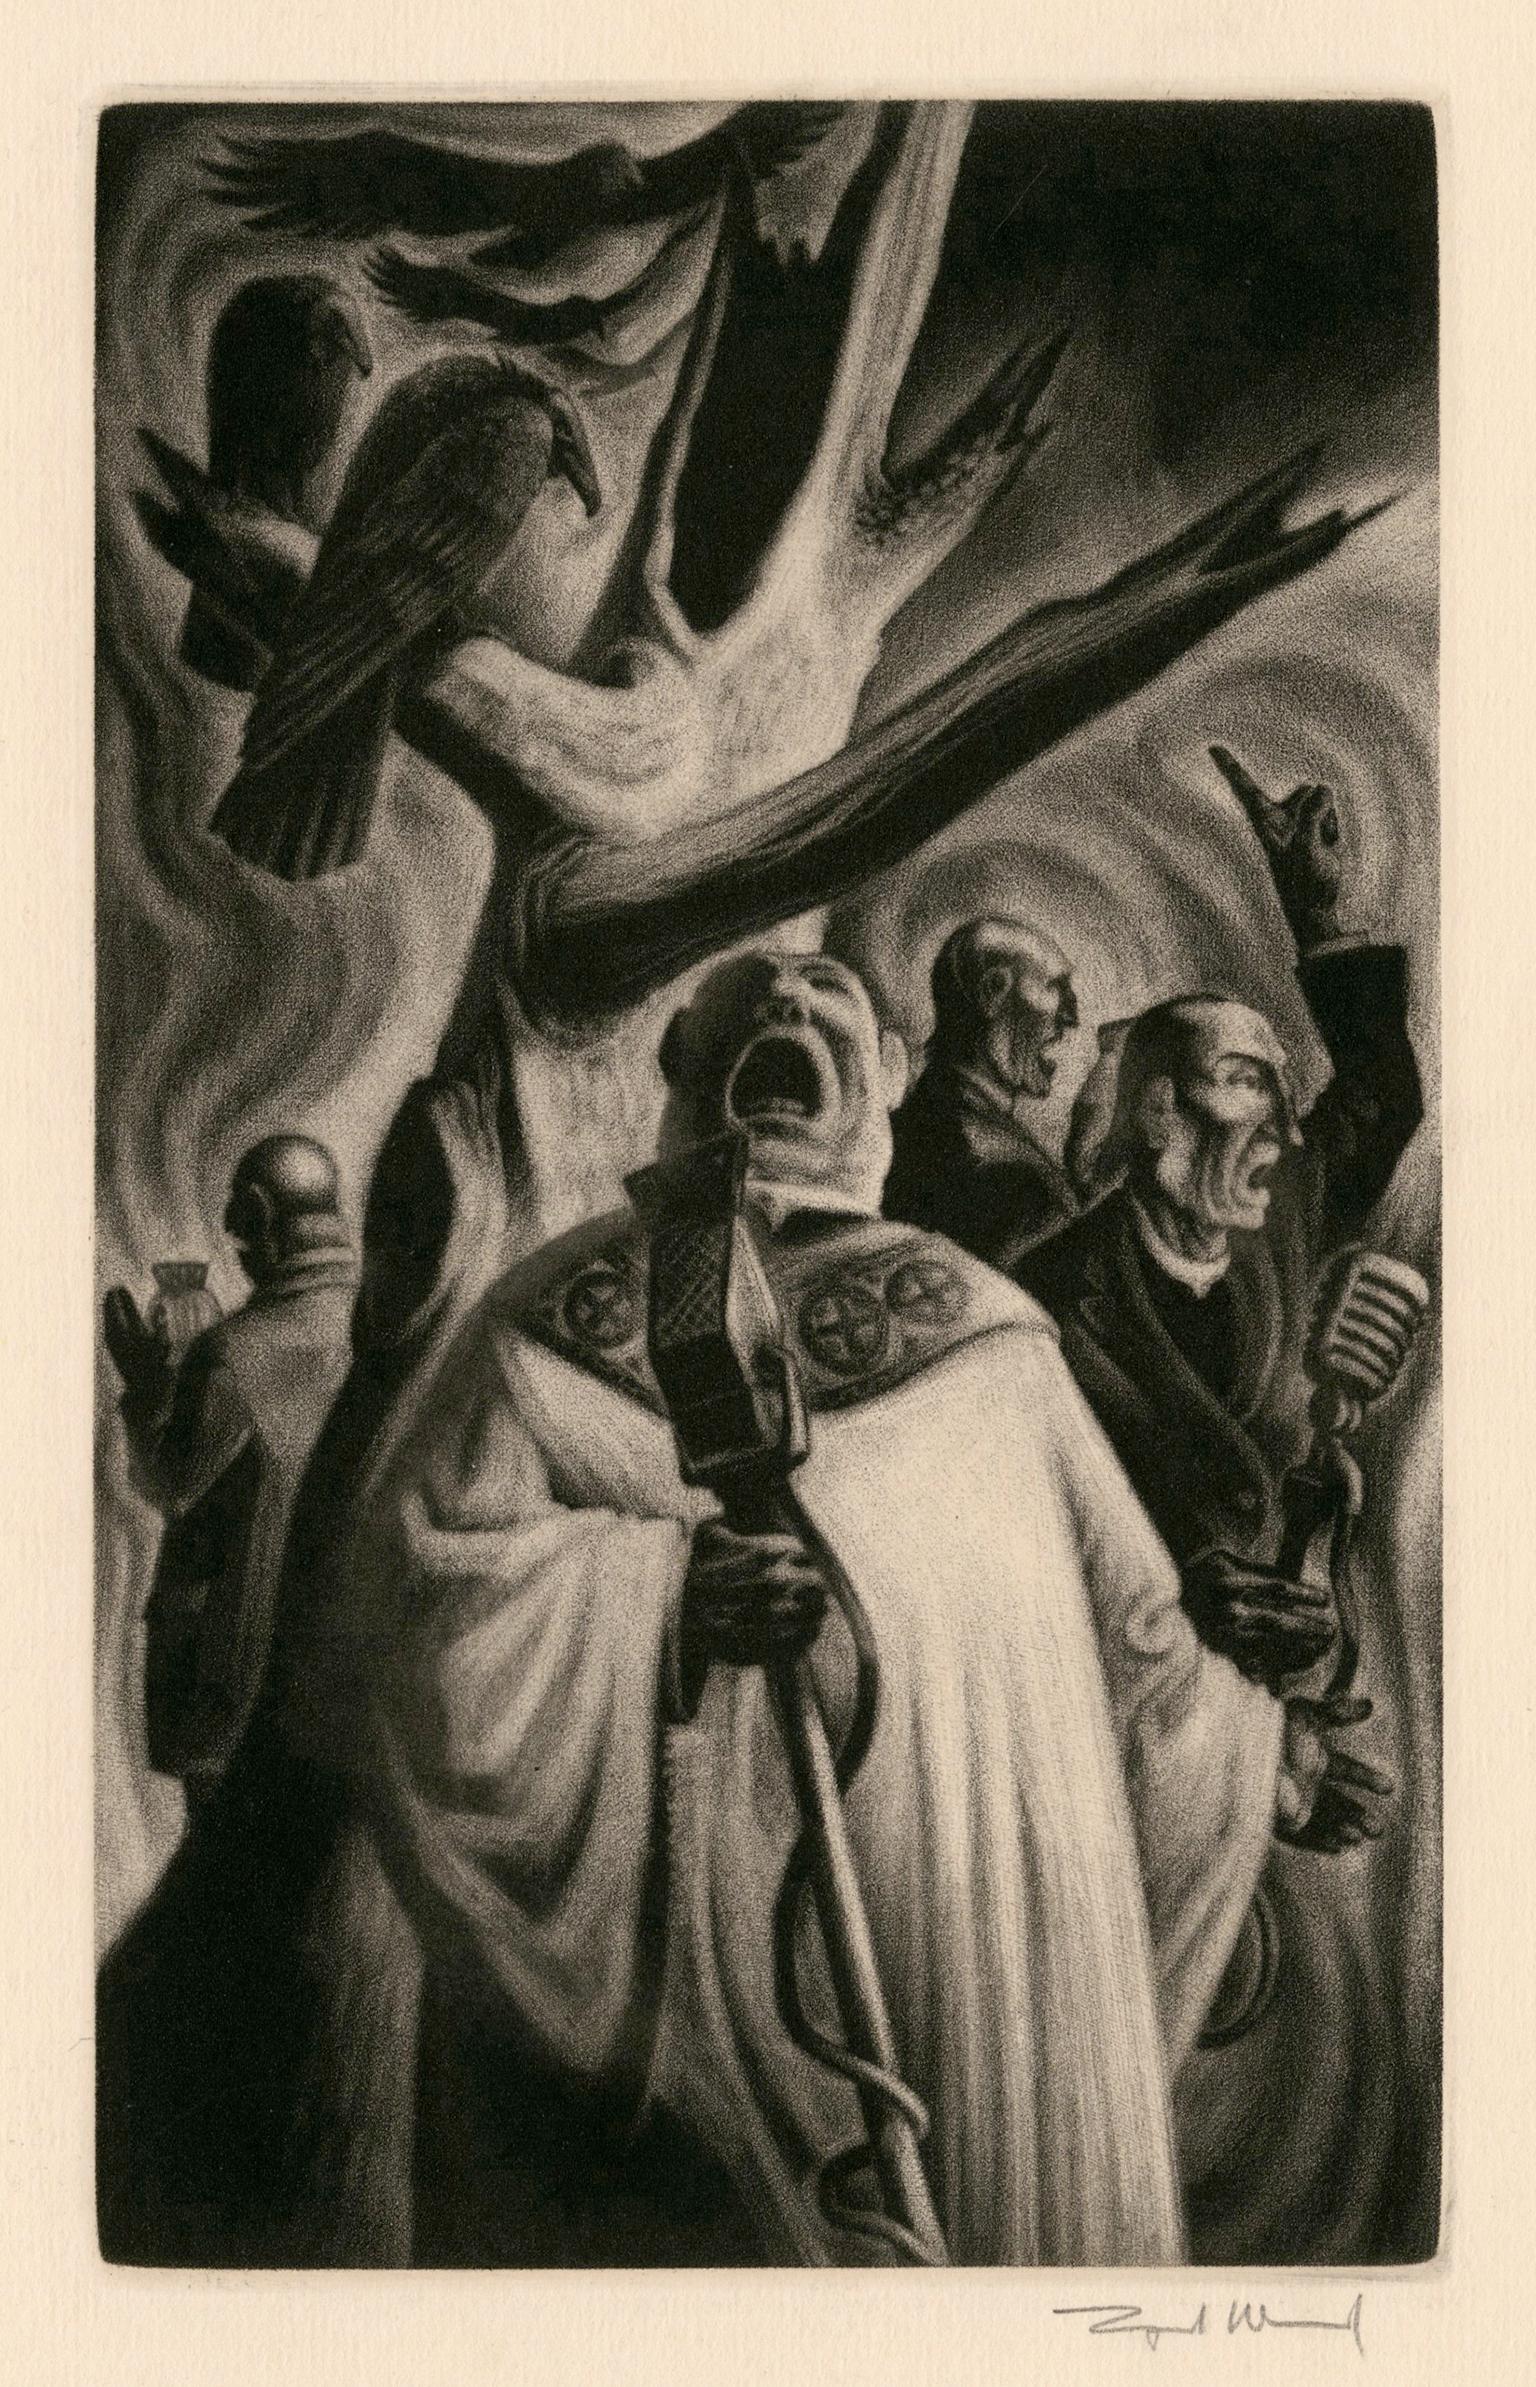 'Priests' from 'In Praise of Folly' — 1940s Graphic Modernism